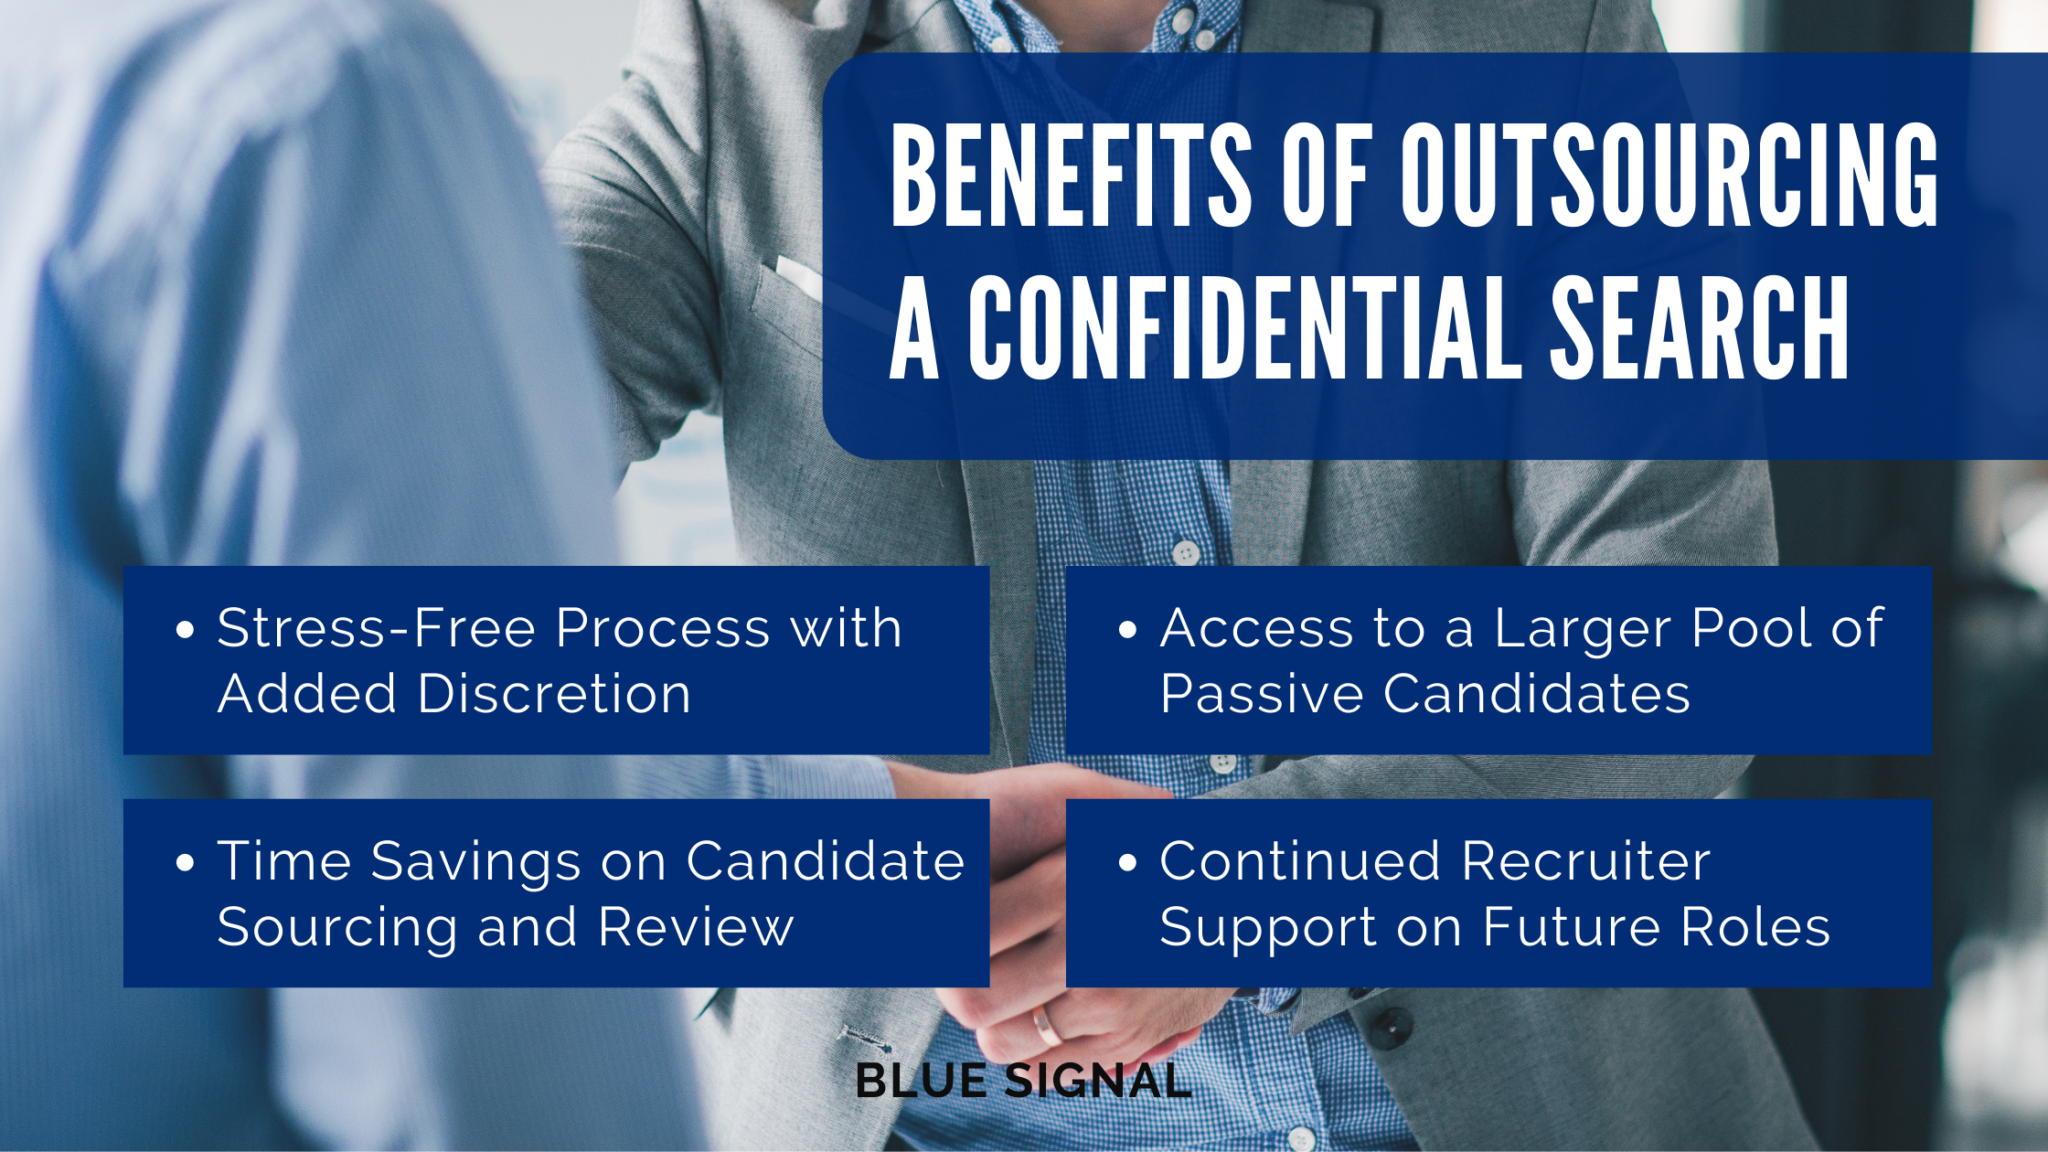 Confidential Search Benefits